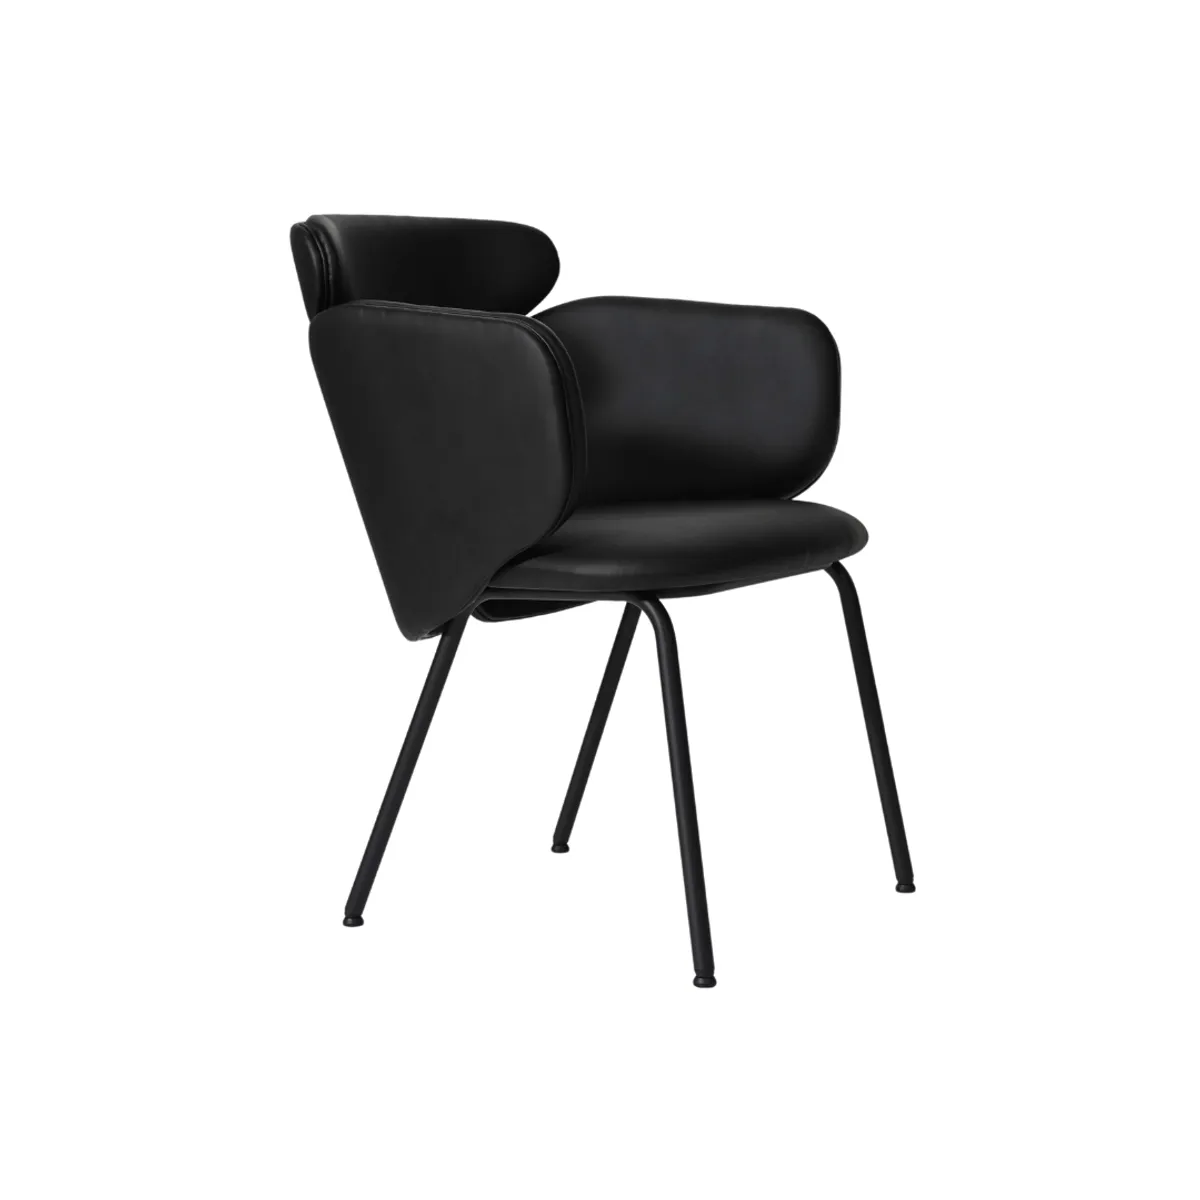 Russo armchair 3+